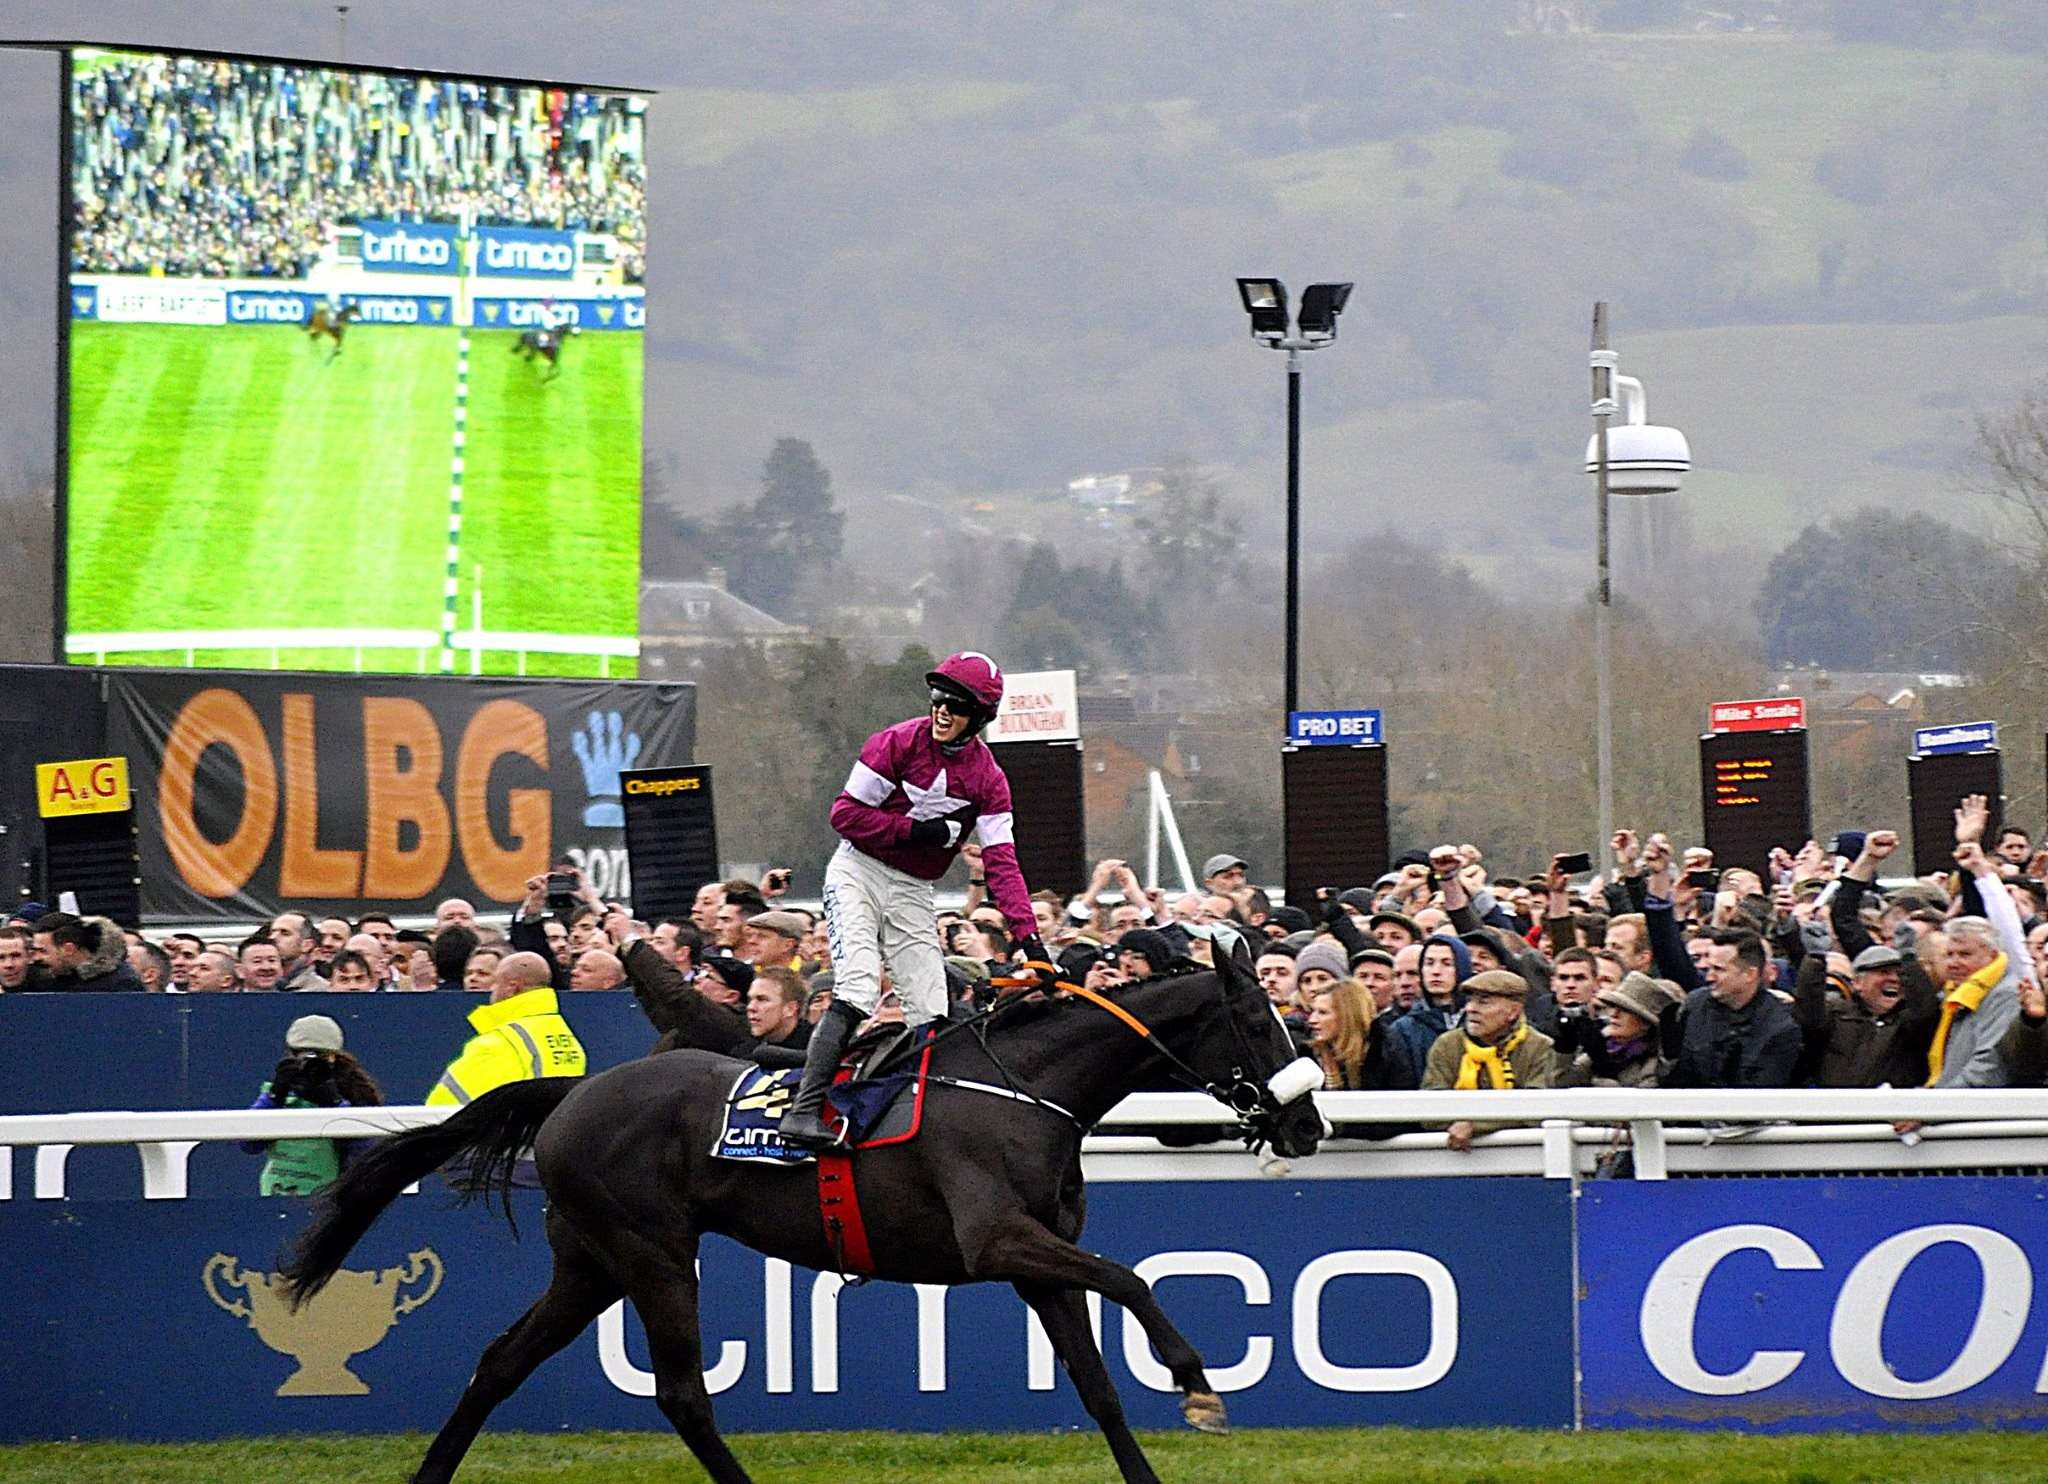 Don Cossack storms to victory in the 2016 Cheltenham Gold Cup (photo: Dave Boylan)